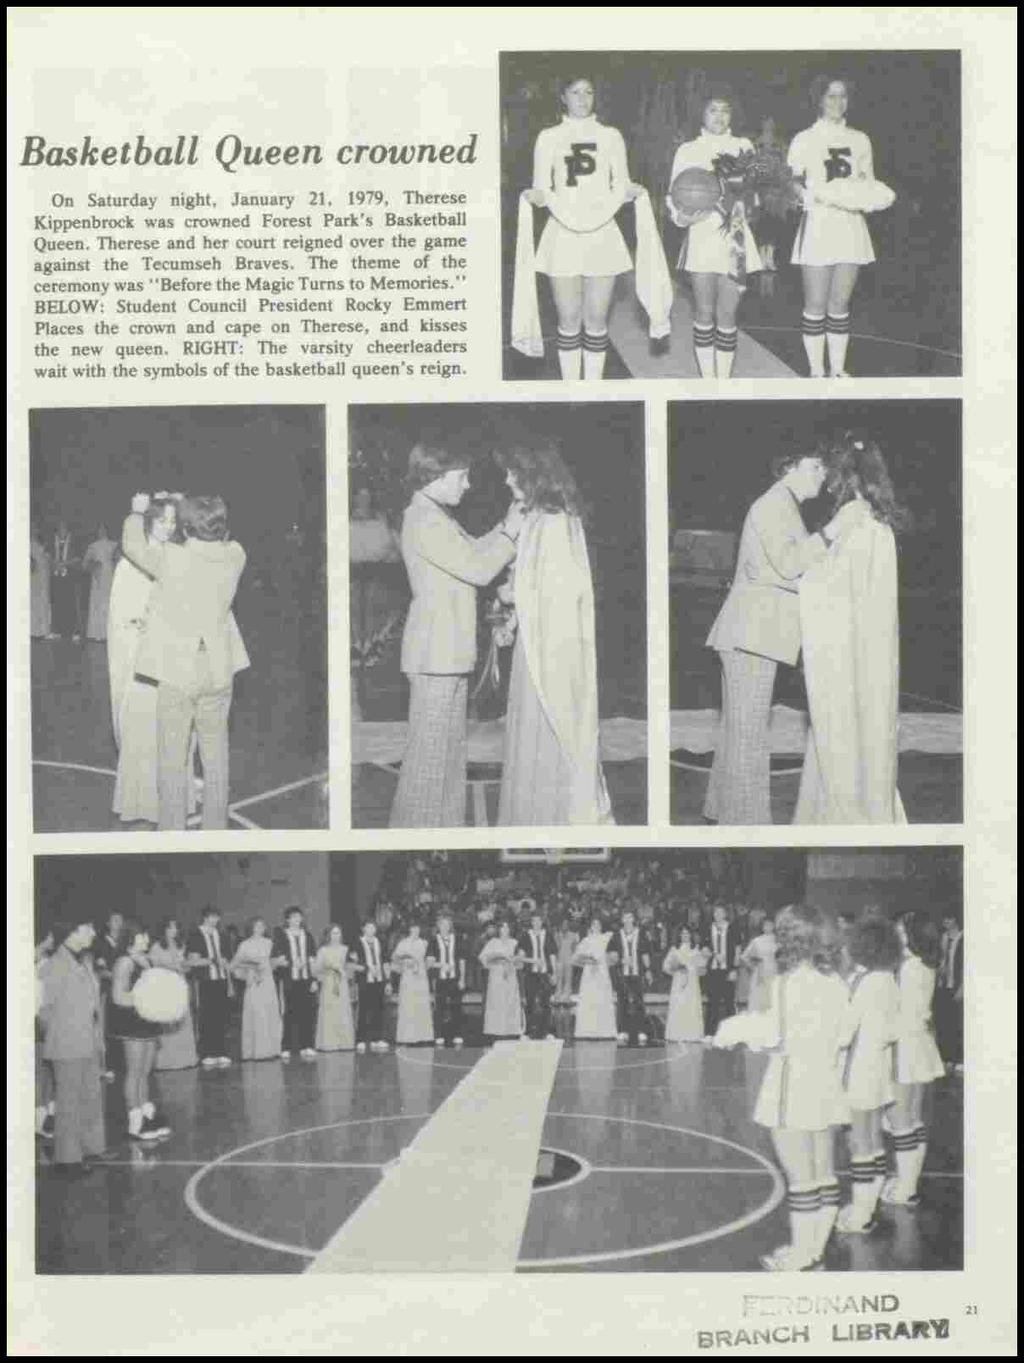 Basketball Queen crowned On Saturday night, January 21, 1979, Therese Kippenbrock was crowned Forest Park's Basketball Queen. Therese and her court reigned over the game against the Tecumseh Braves.